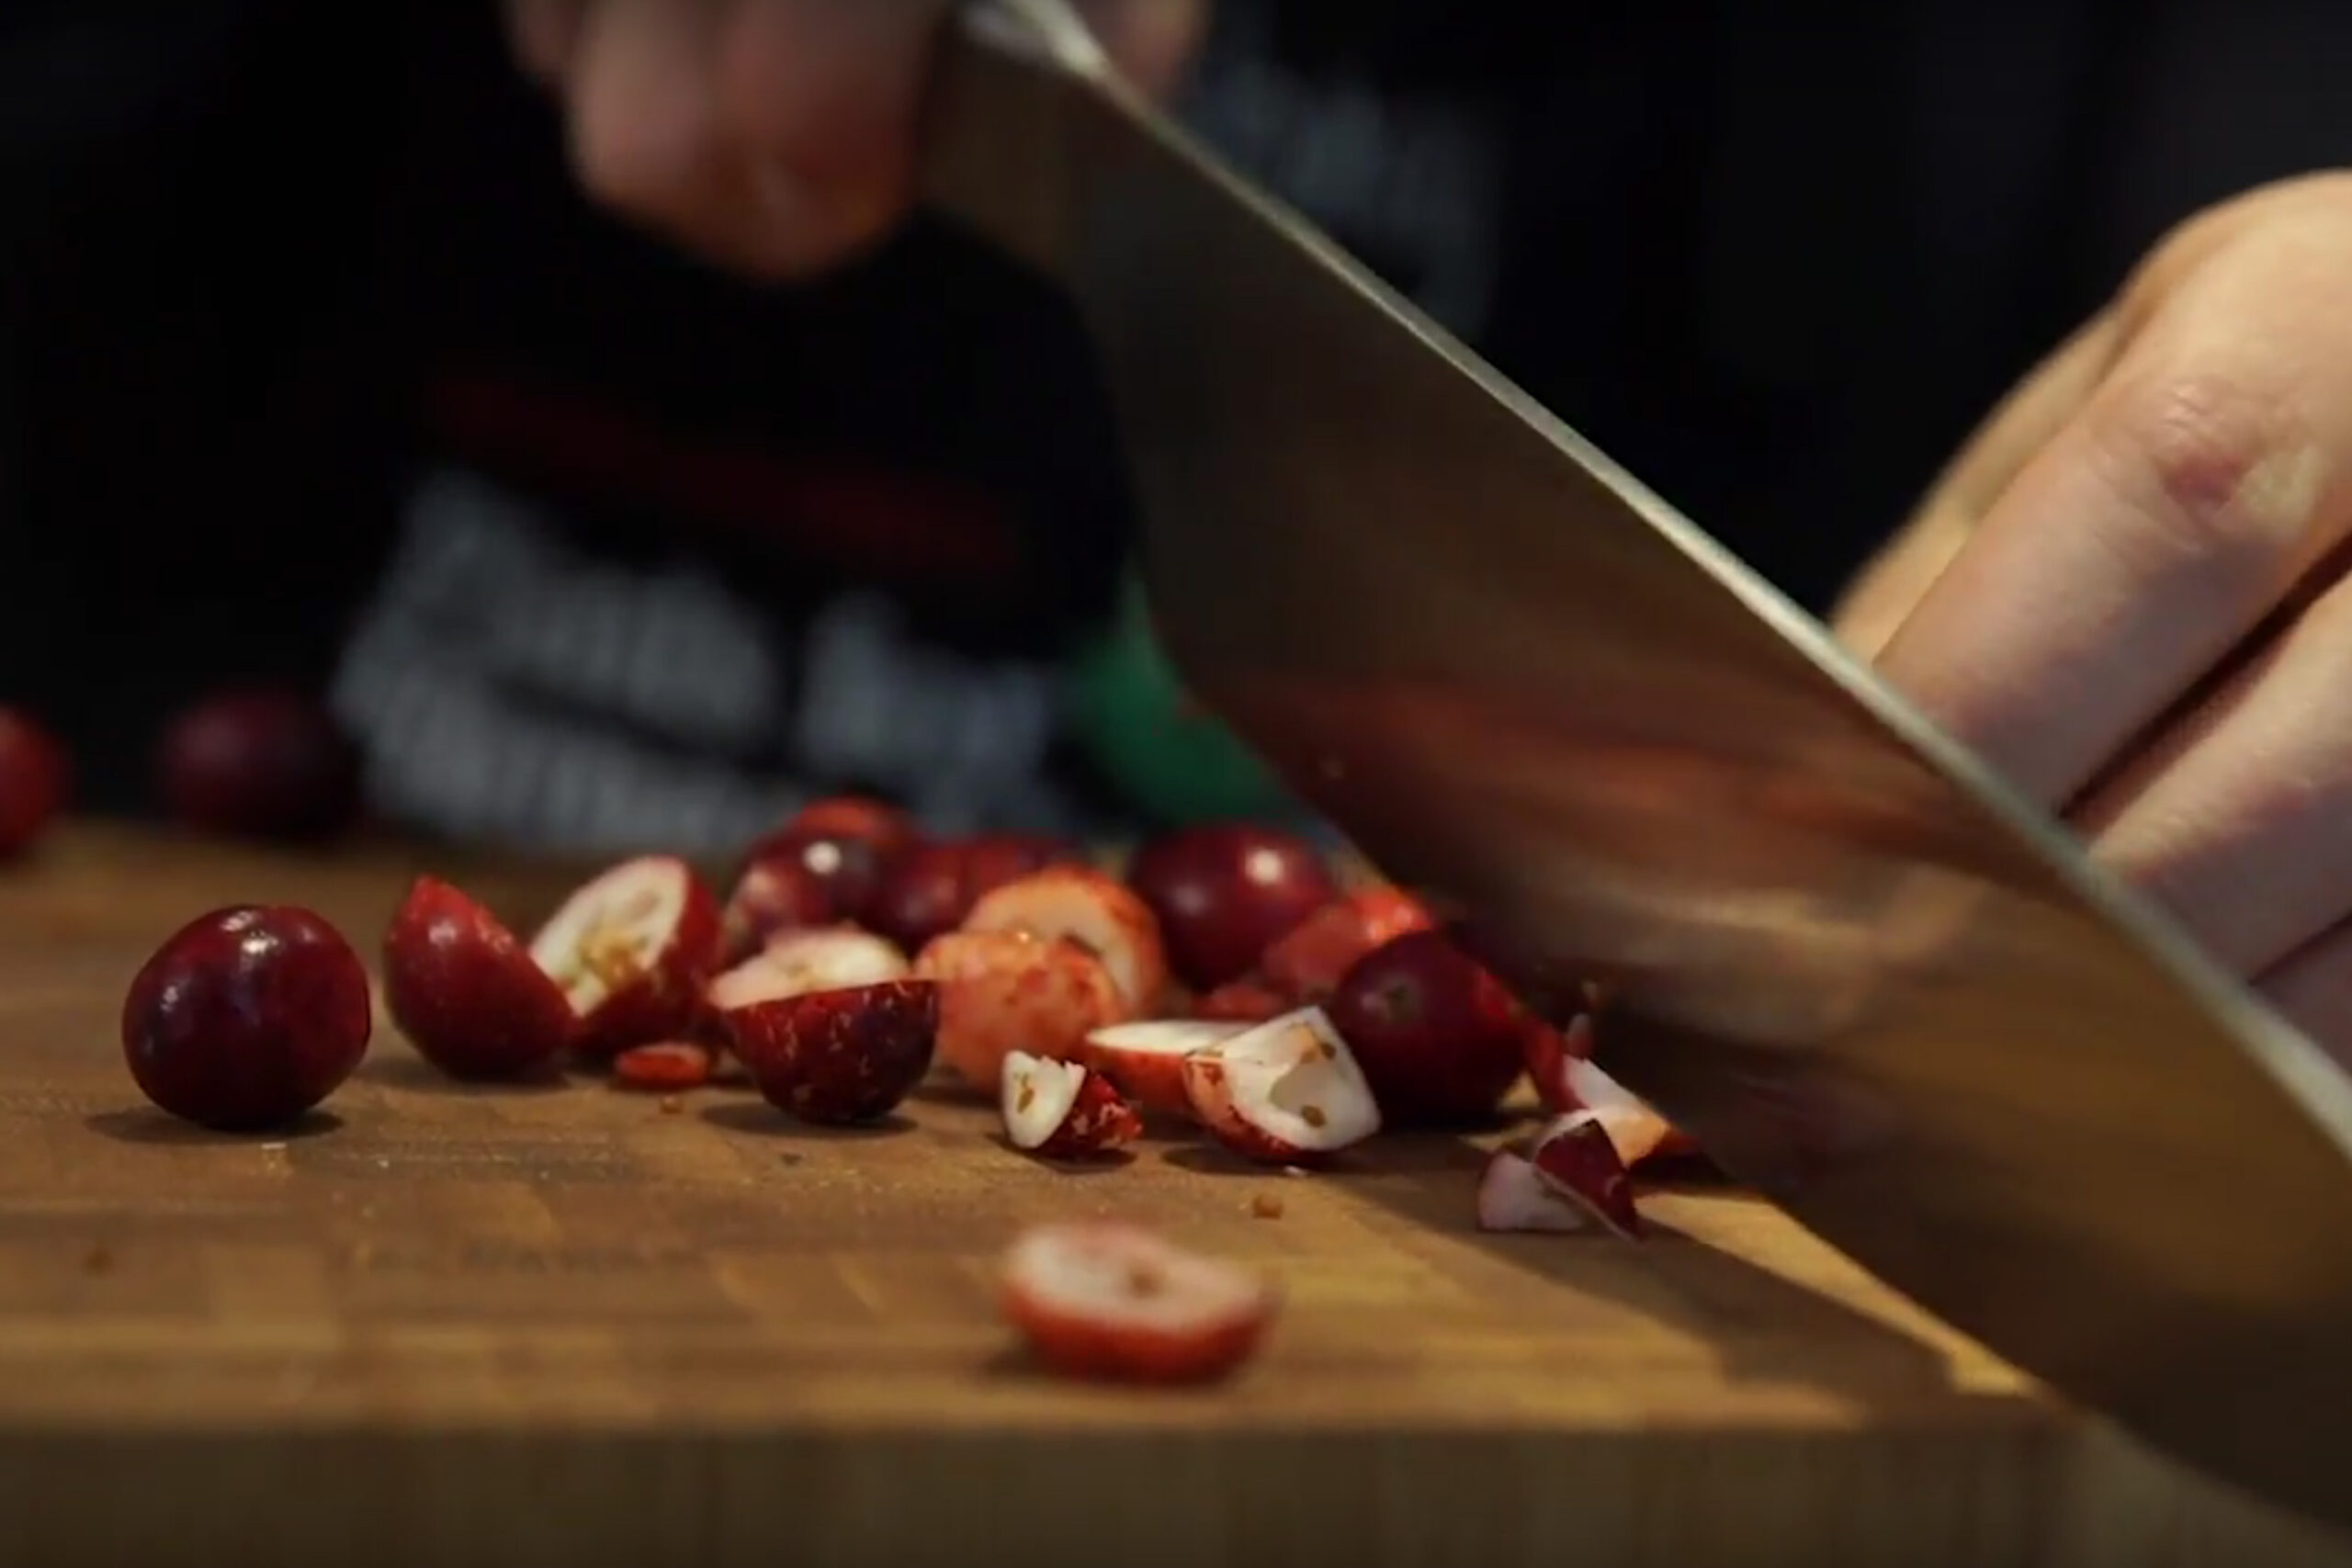 Knife cutting cranberries on a wooden cutting board